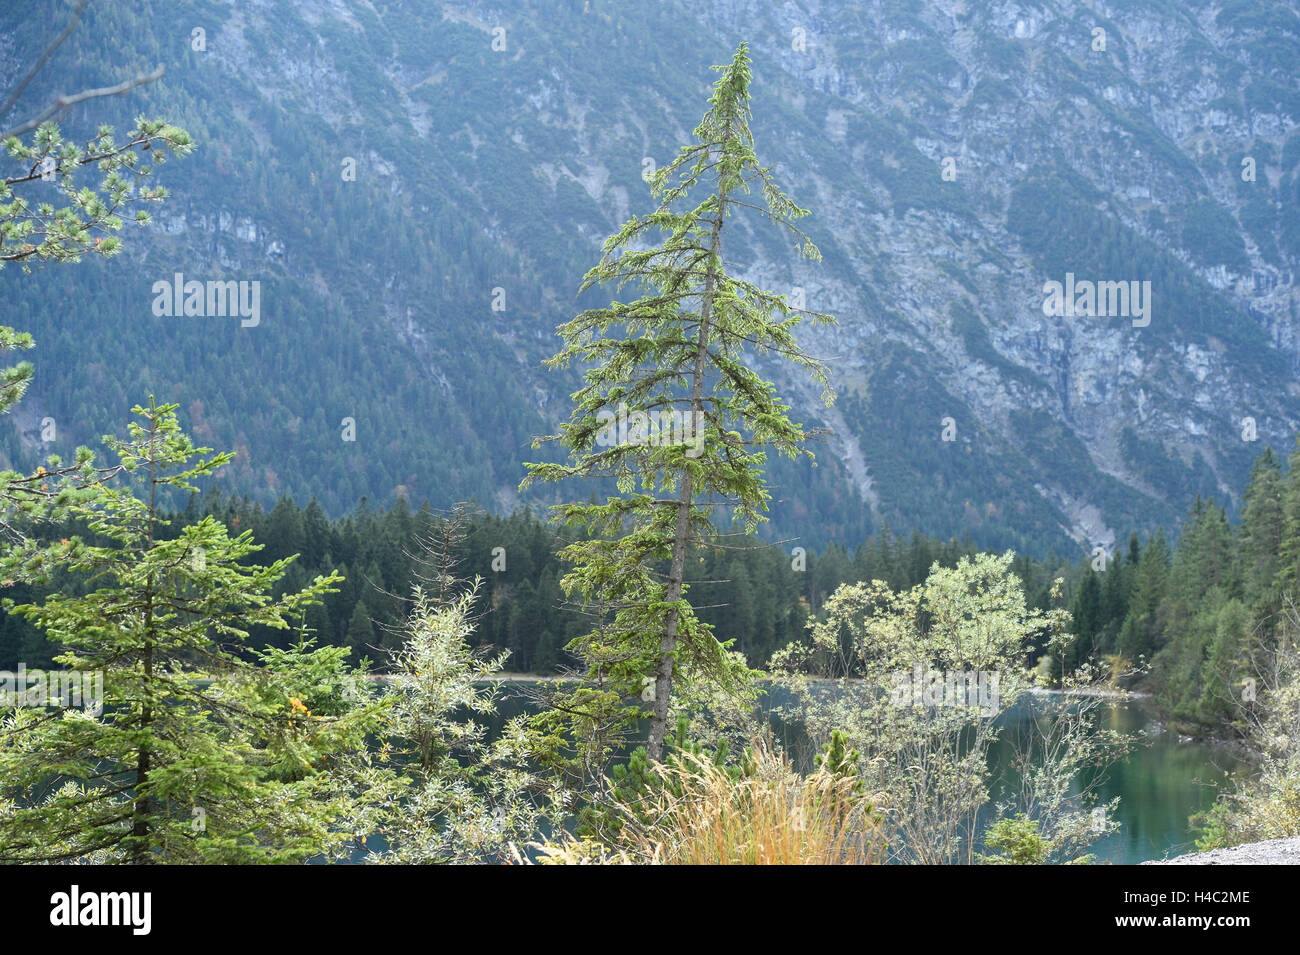 Landscape, common spruces, Picea abies, lake, waterside, clear Stock Photo